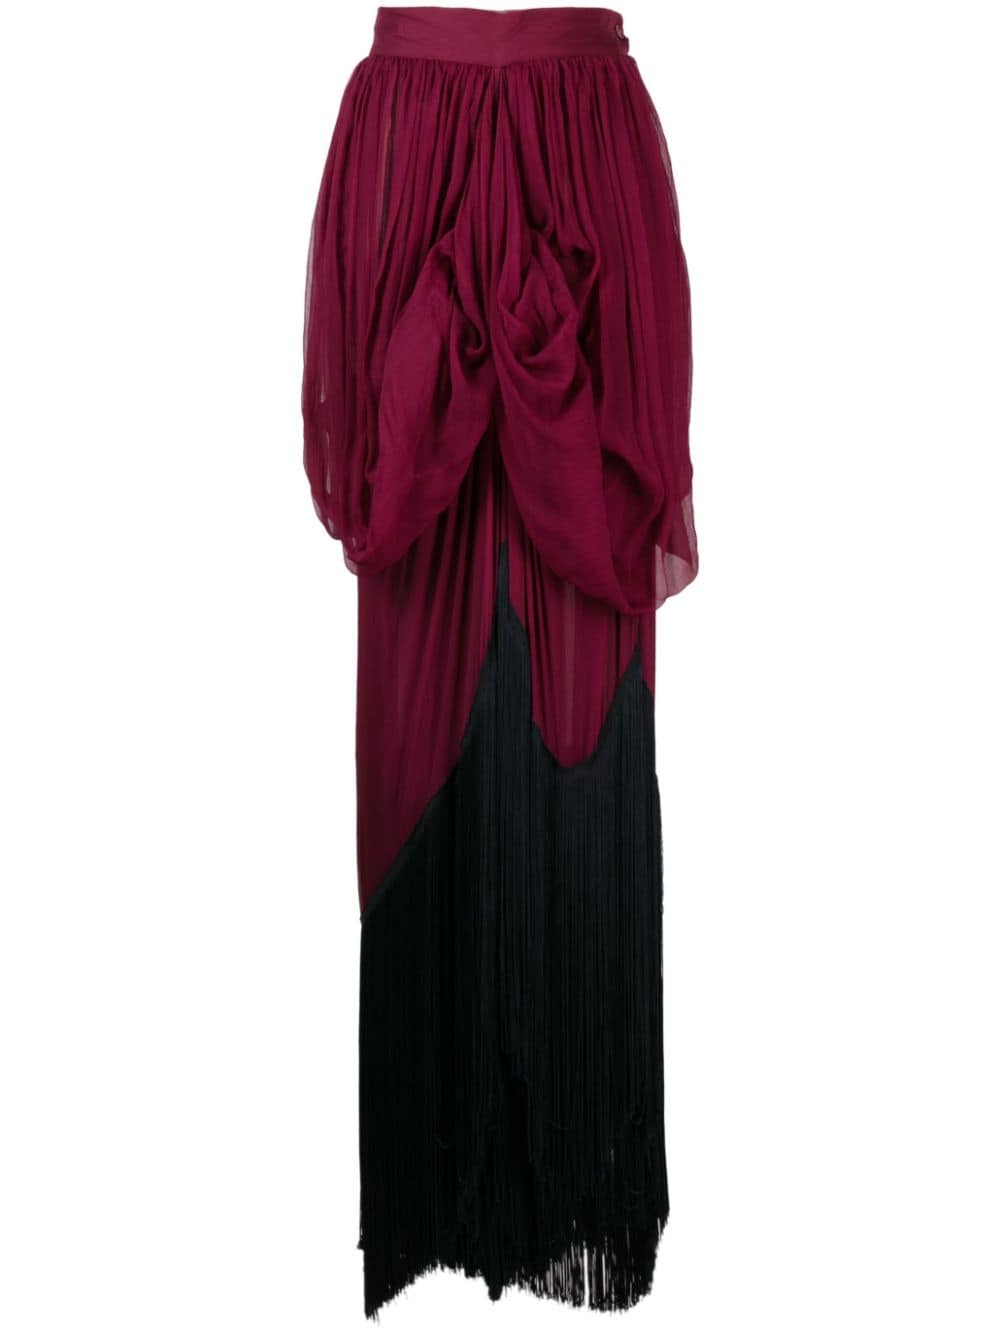 Pre-owned Dolce & Gabbana 2000s Draped Fringed Maxi Silk Skirt In Red